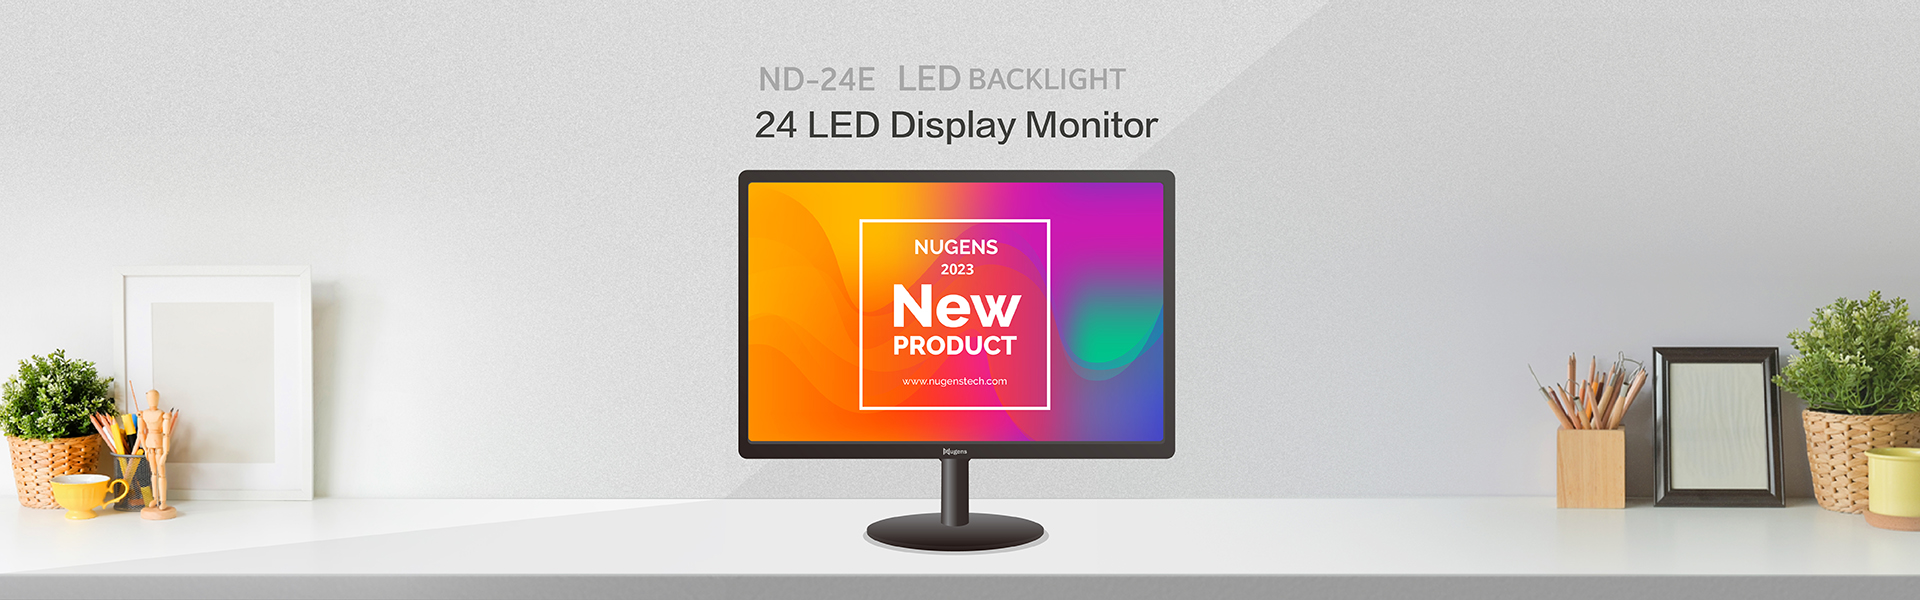 Nugens 24 LED Display MonitorBanner-pc